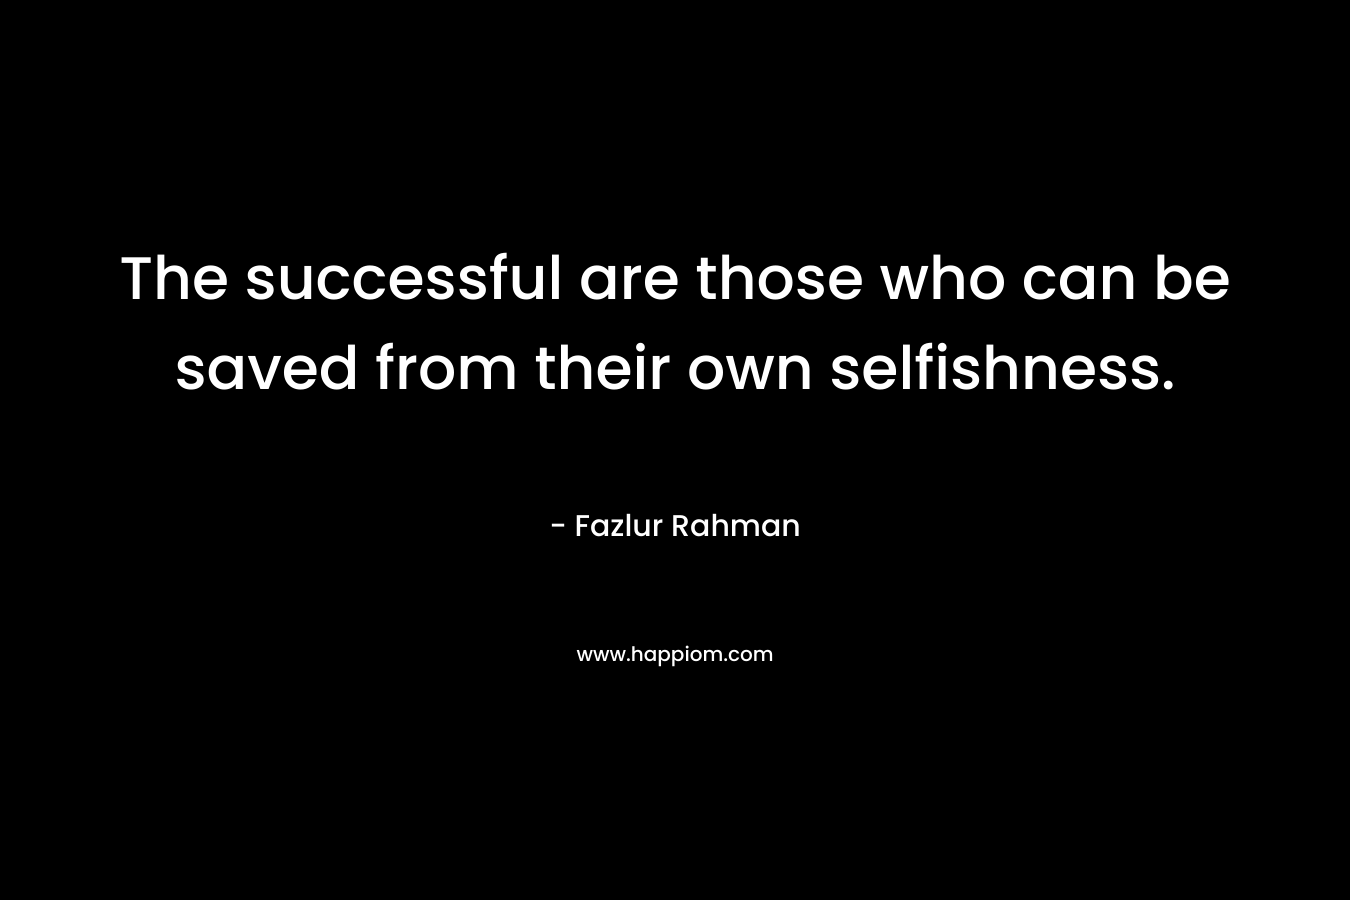 The successful are those who can be saved from their own selfishness. – Fazlur Rahman